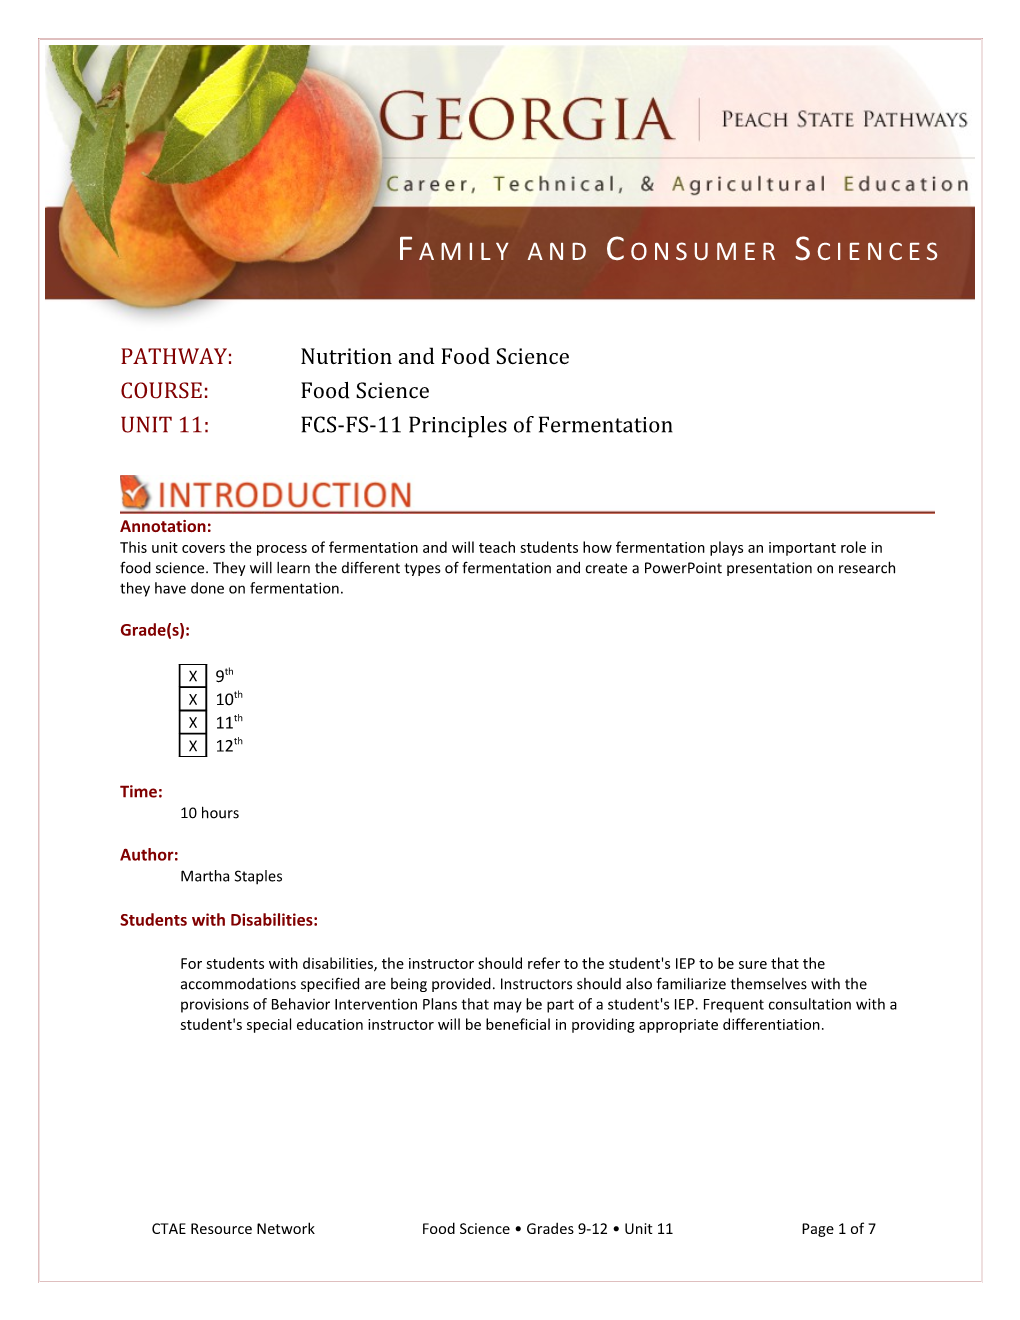 PATHWAY: Nutrition and Food Science